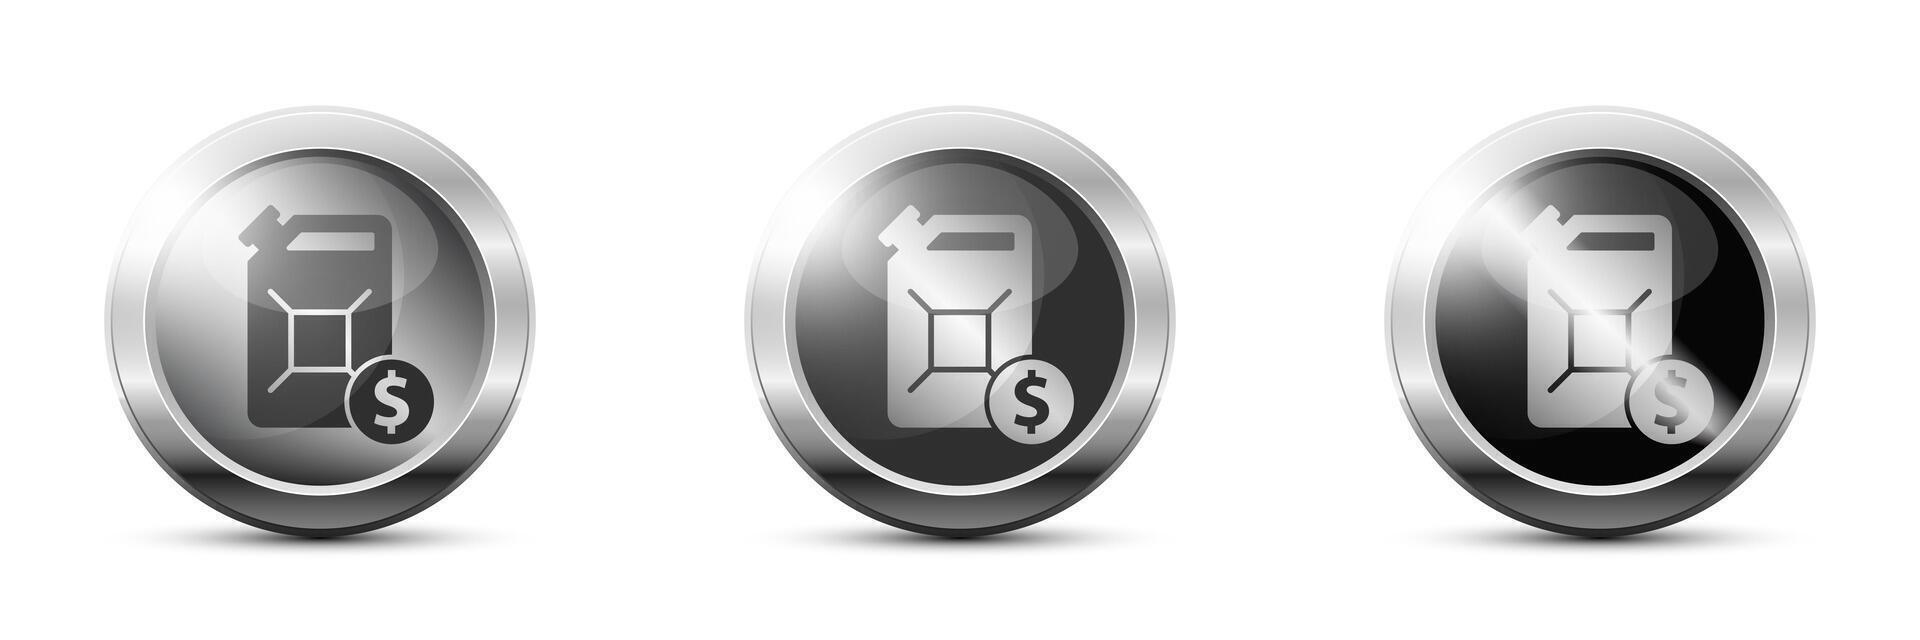 Fuel canister and dollar sign. Rise in gasoline prices icon. Fuel crisis symbol. Vector illustration.